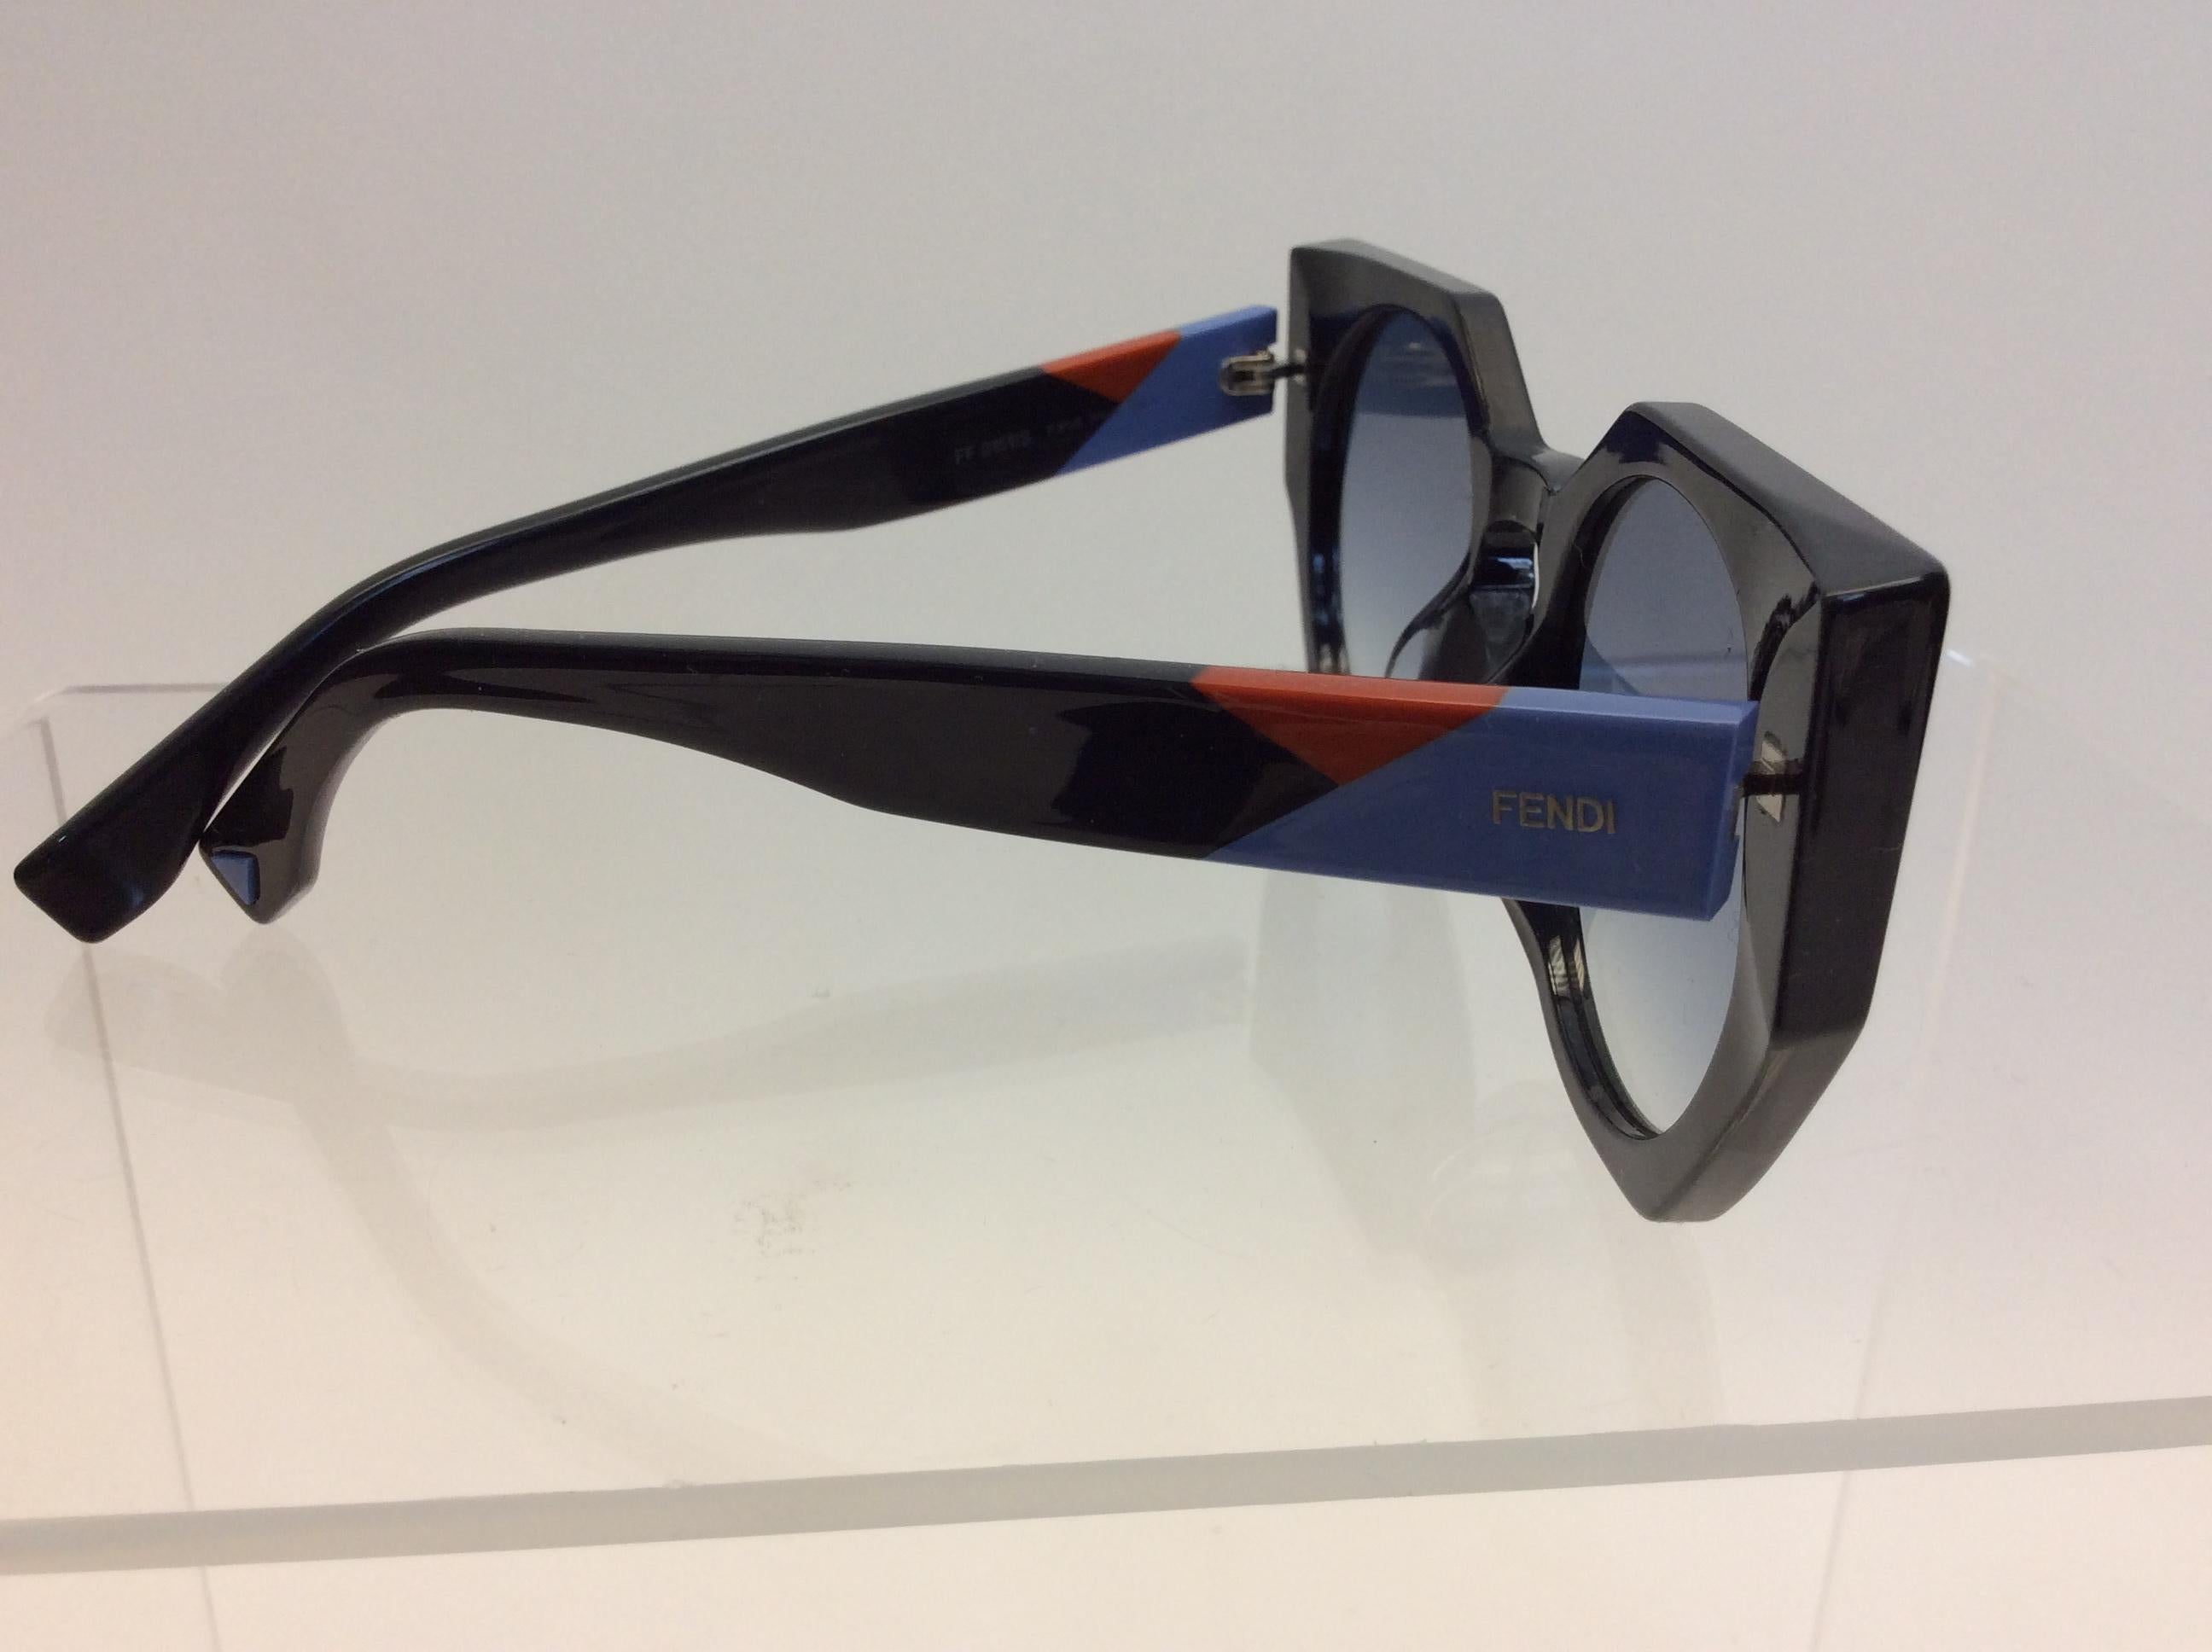 Fendi Navy Blue Sunglasses In Excellent Condition For Sale In Narberth, PA